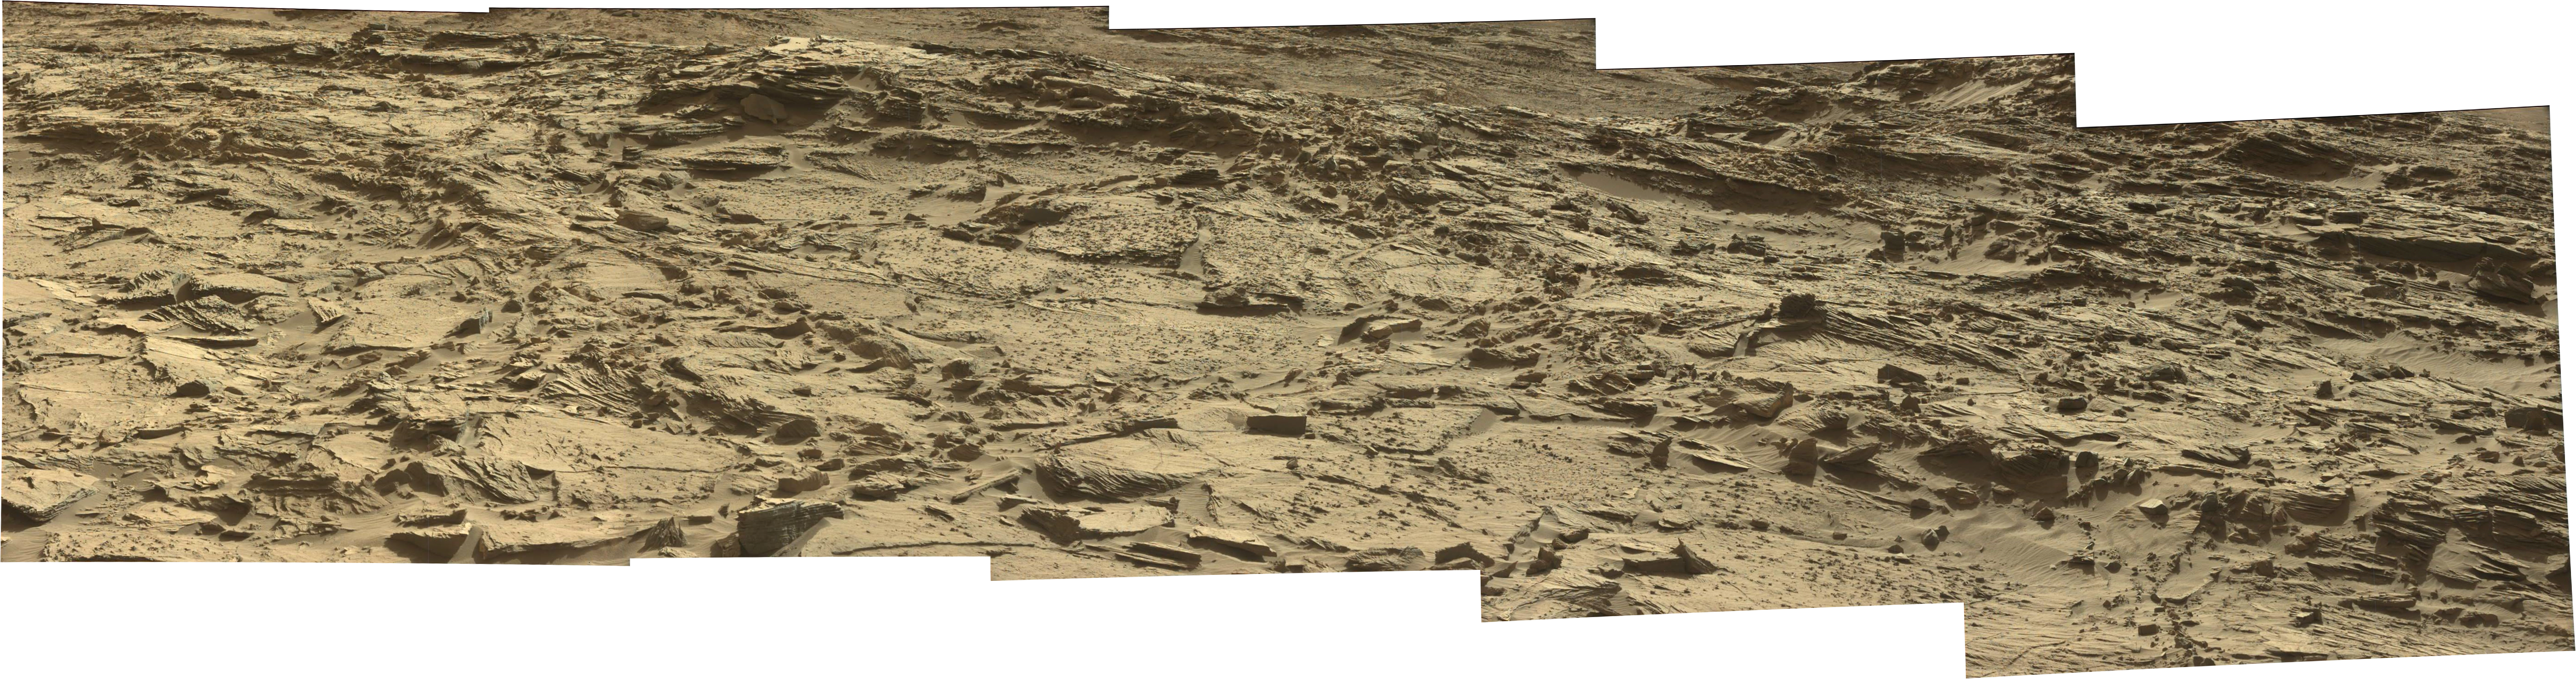 Curiosity Rover Panoramic View 1 Of Mars Sol 1296 Click - Mars (5618x1481), Png Download